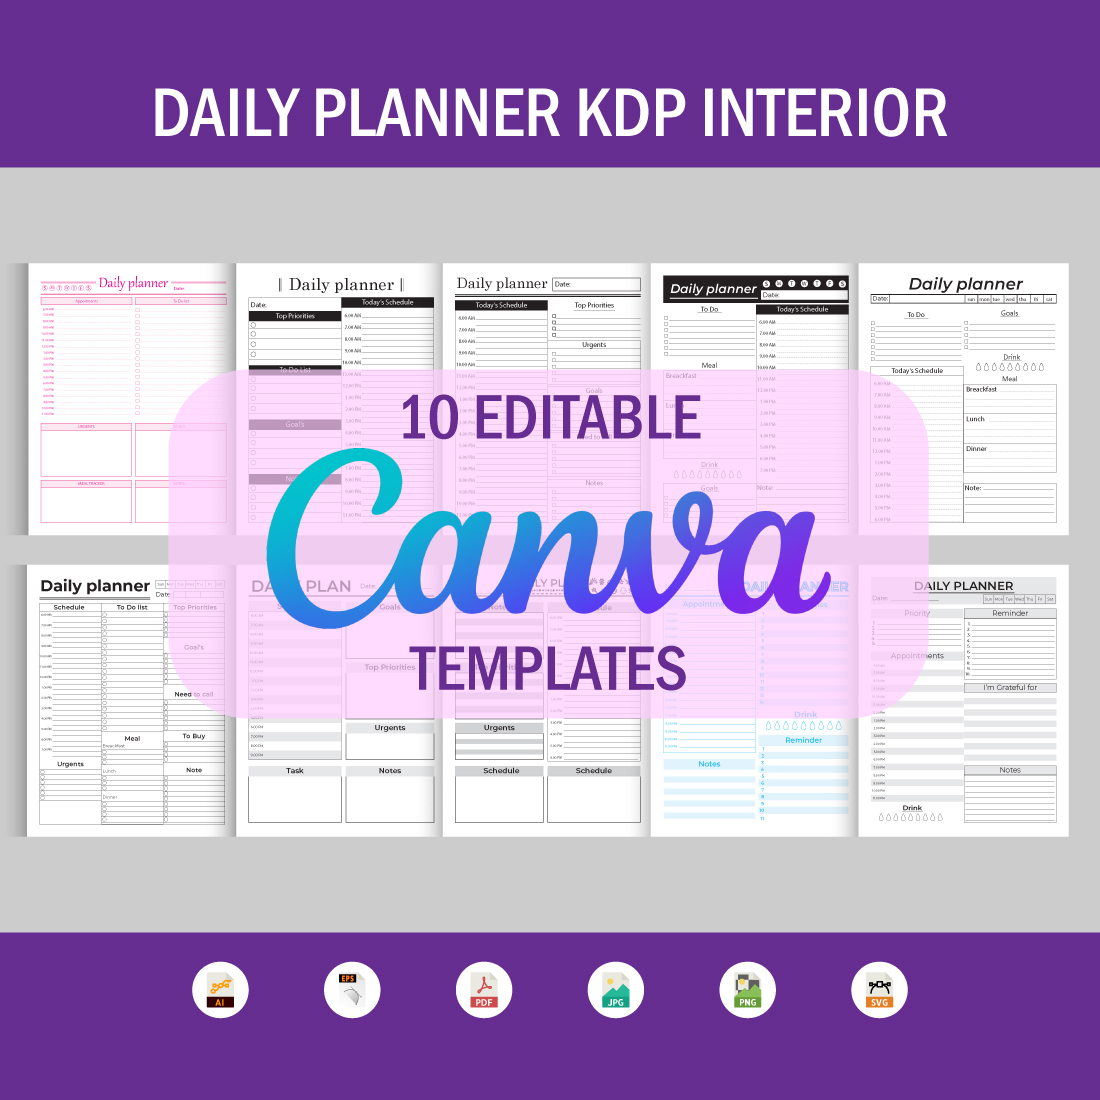 Editable Canva Templates Daily Planner for KDP cover image.